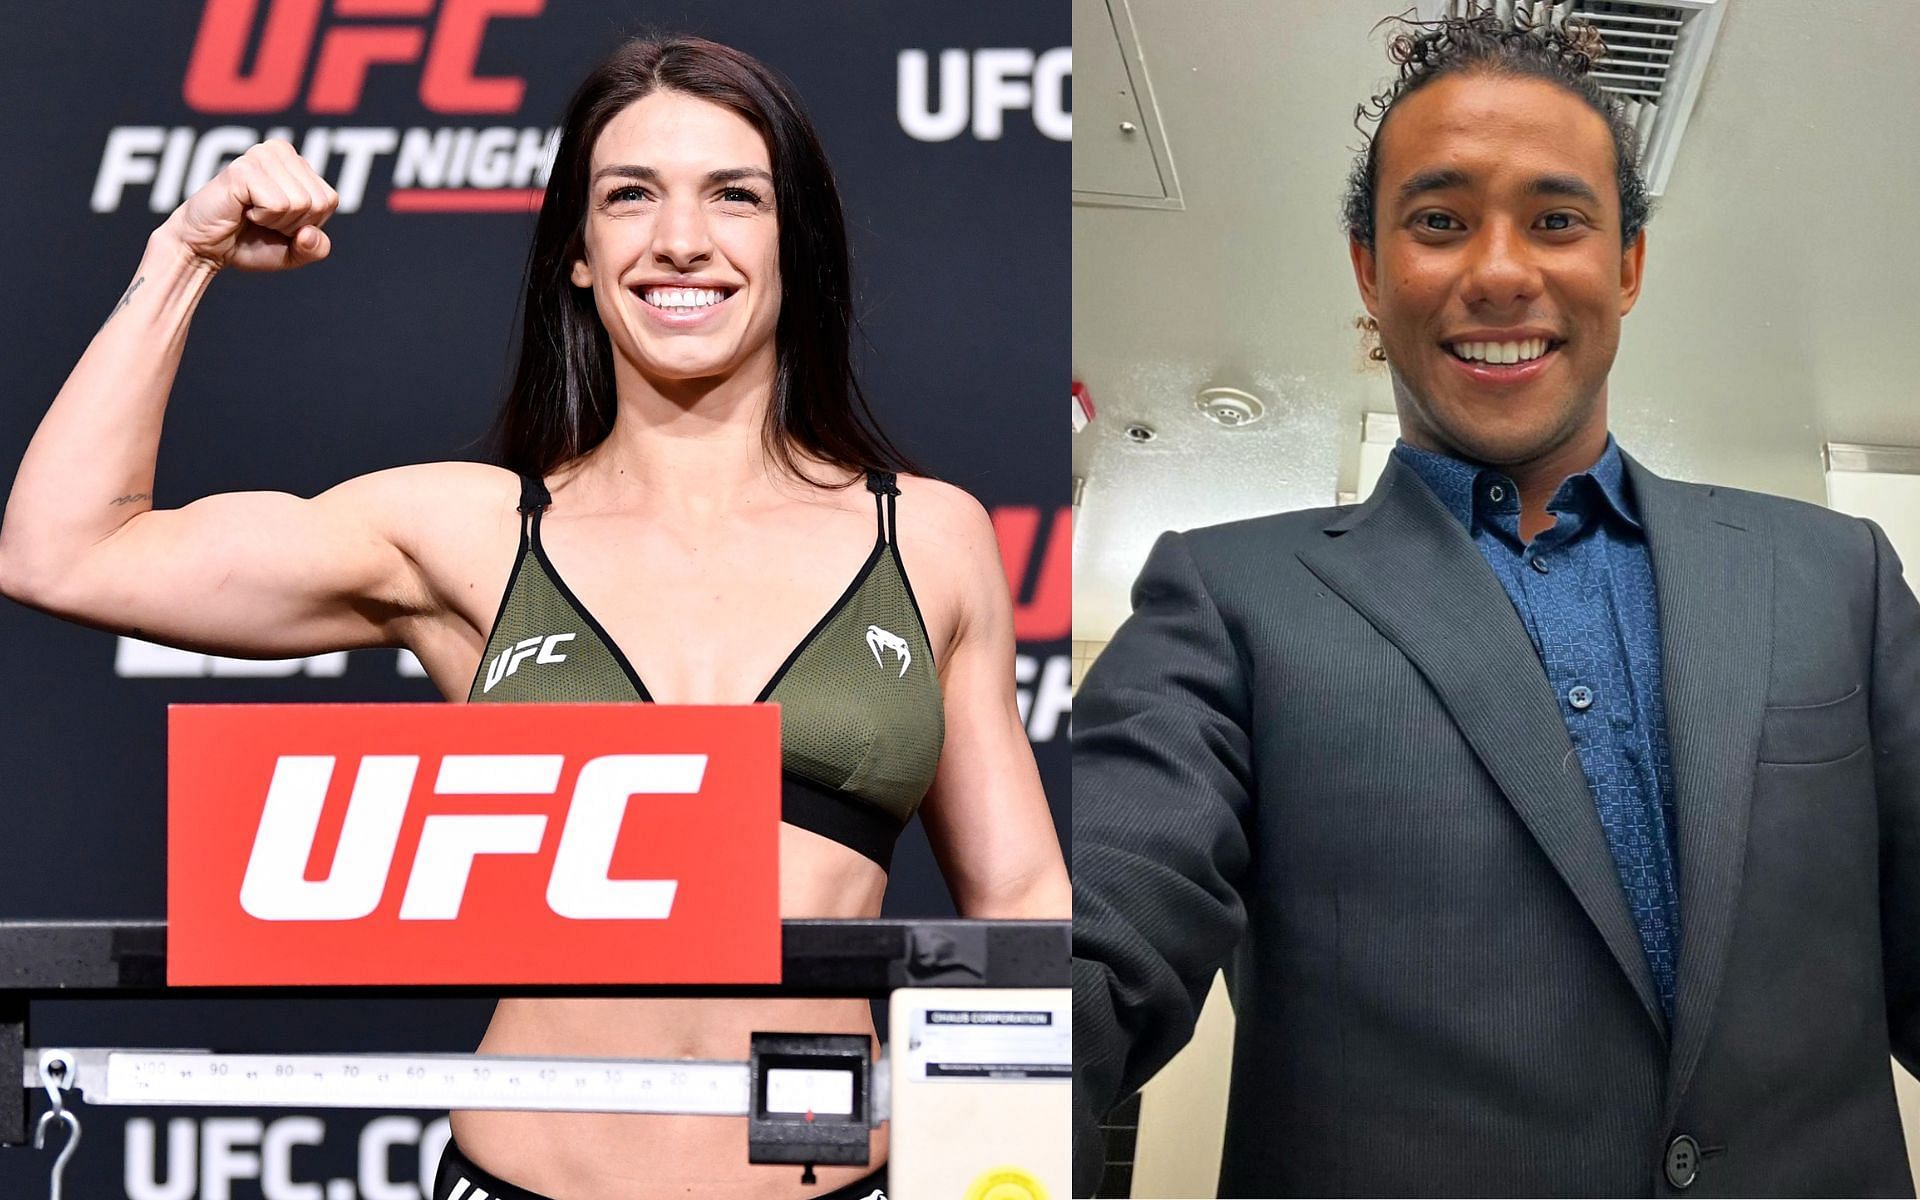 Mackenzie Dern (left) and Wesley Santos (right). [Images courtesy: left image from Getty Images and right image from Instagram @santoswesley]